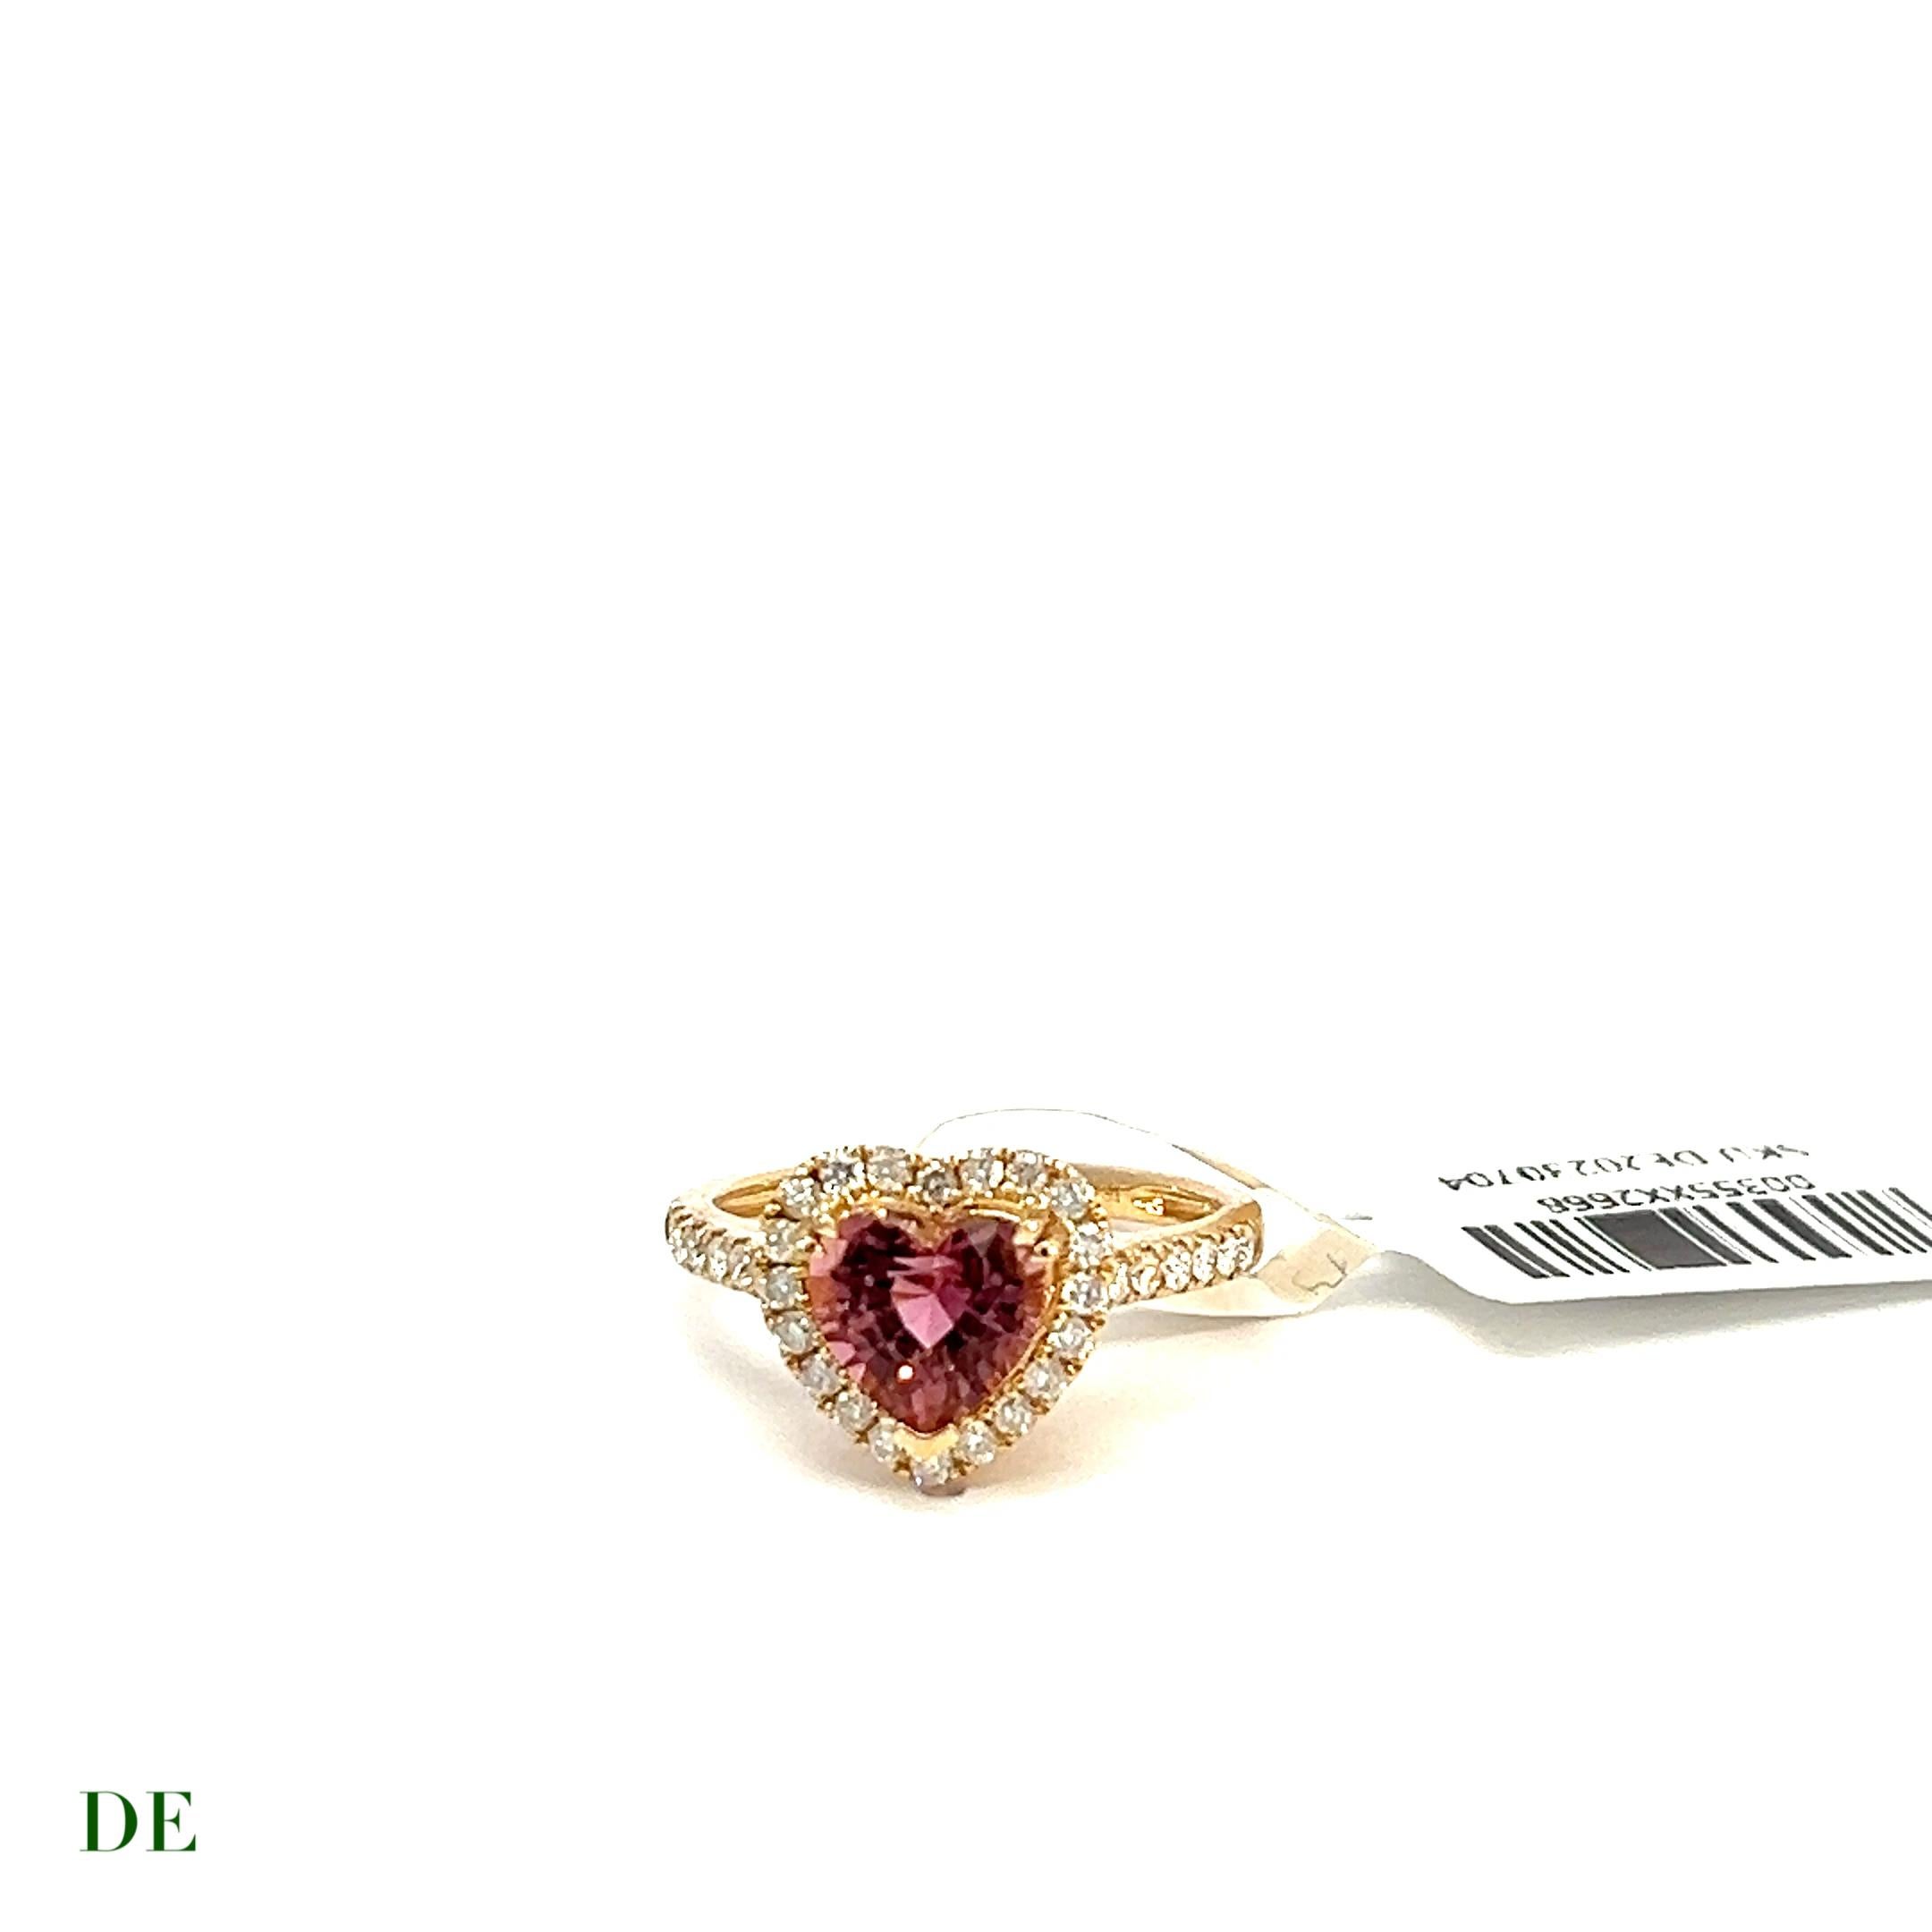 Classic 14k 1.78 ct burgundy pink tourmaline heart 2.40 Ct Diamond cocktail Ring

Introducing the epitome of romance and elegance: the Classic 14k 1.78 ct Burgundy Pink Tourmaline Heart with 2.40 Ct Diamond Cocktail Ring. This exquisite piece of